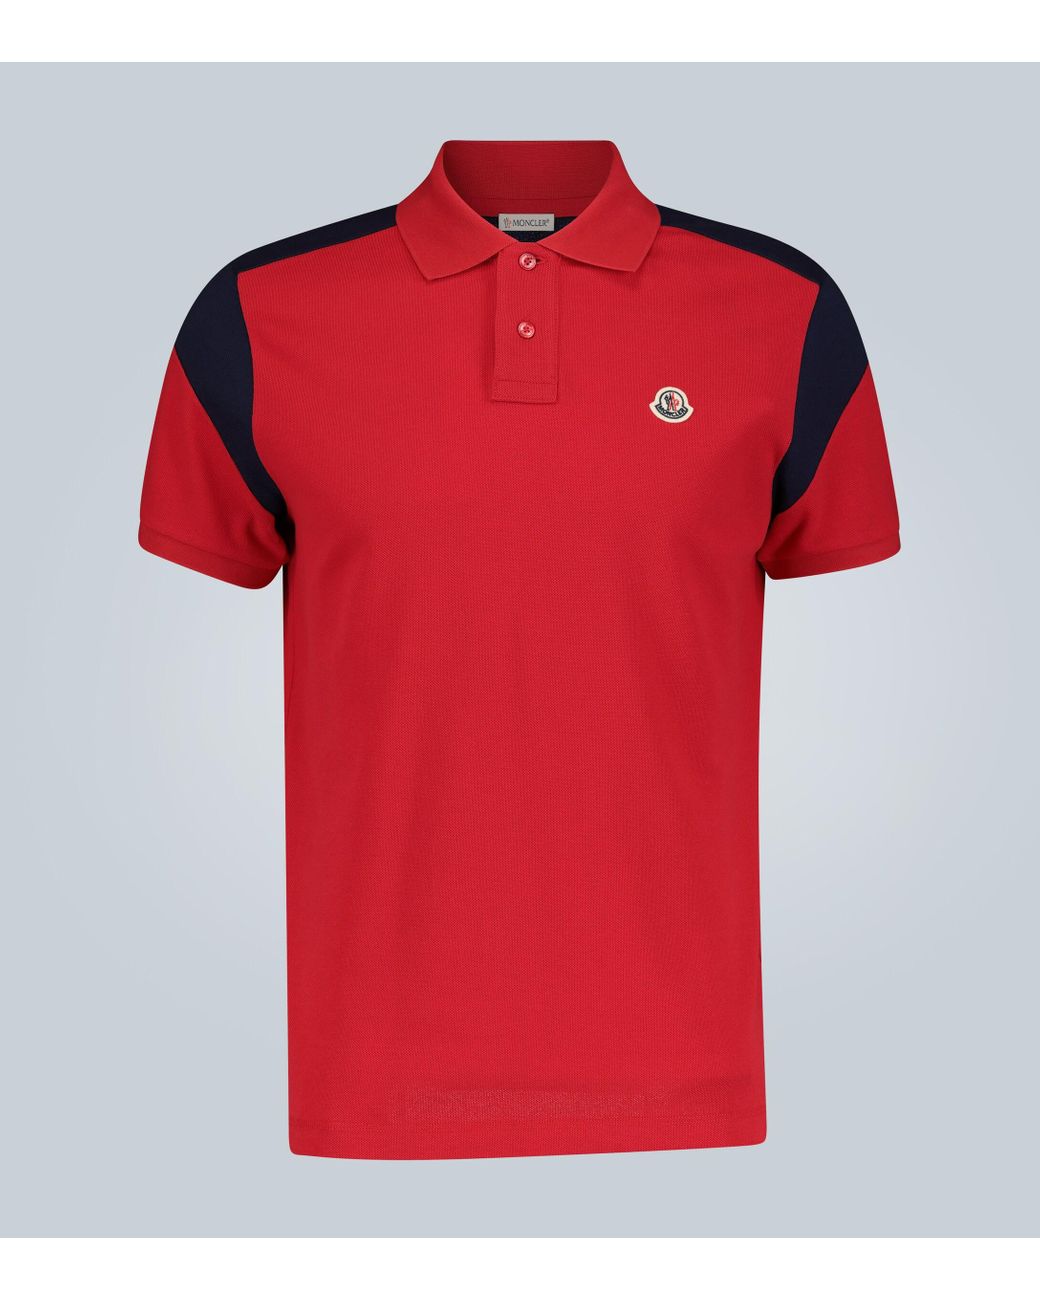 Moncler Paneled Cotton Polo Shirt in Red for Men - Lyst